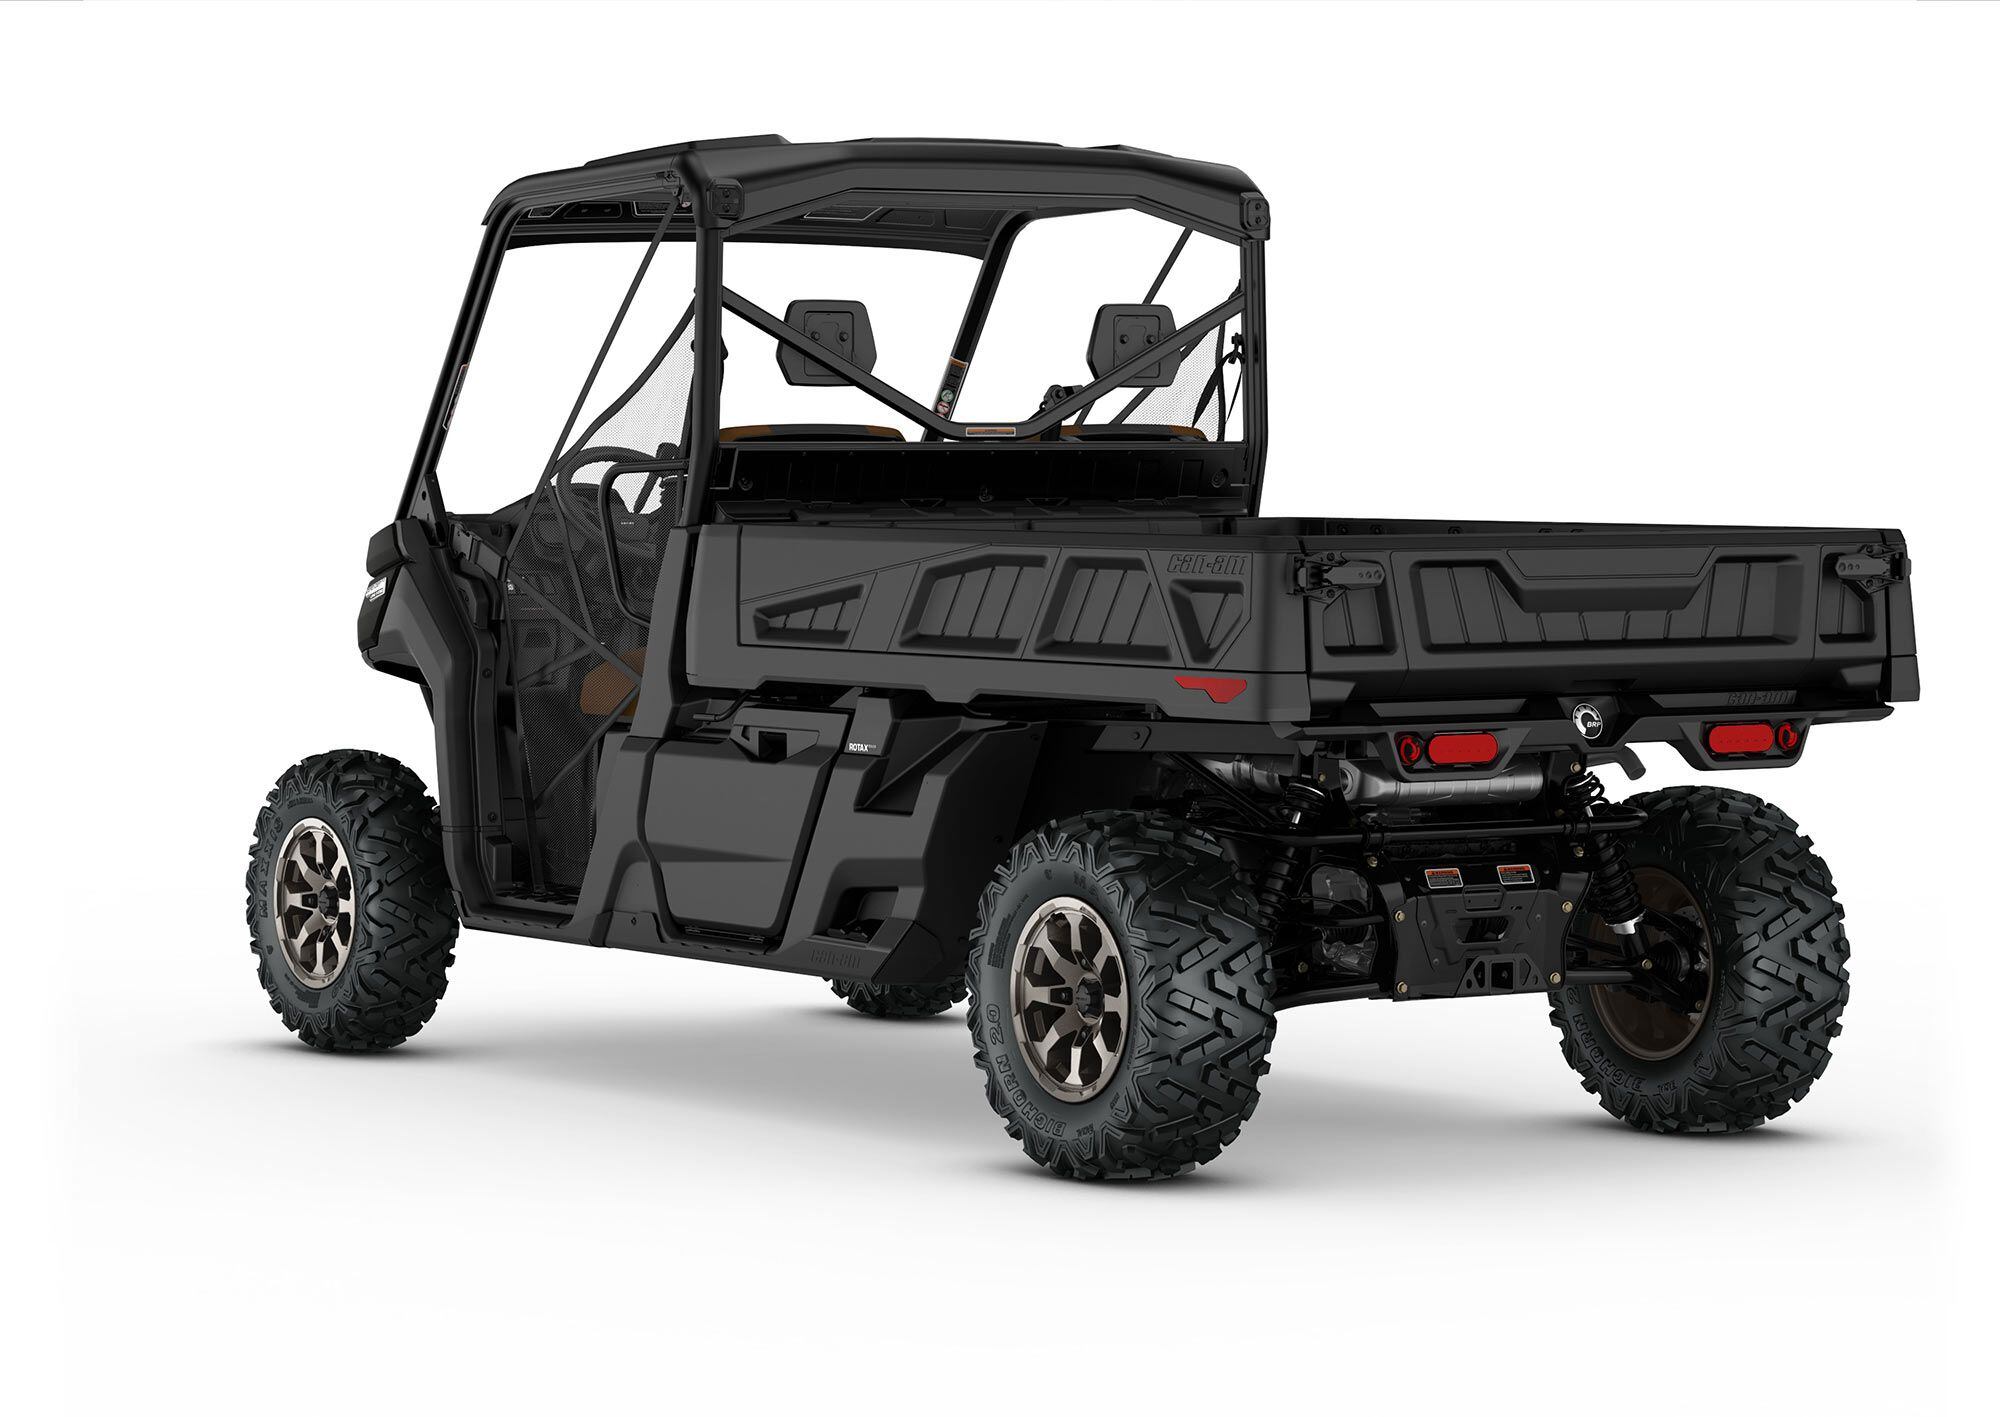 2022 Can-Am Defender Pro Lone Star rear view in Night Black.